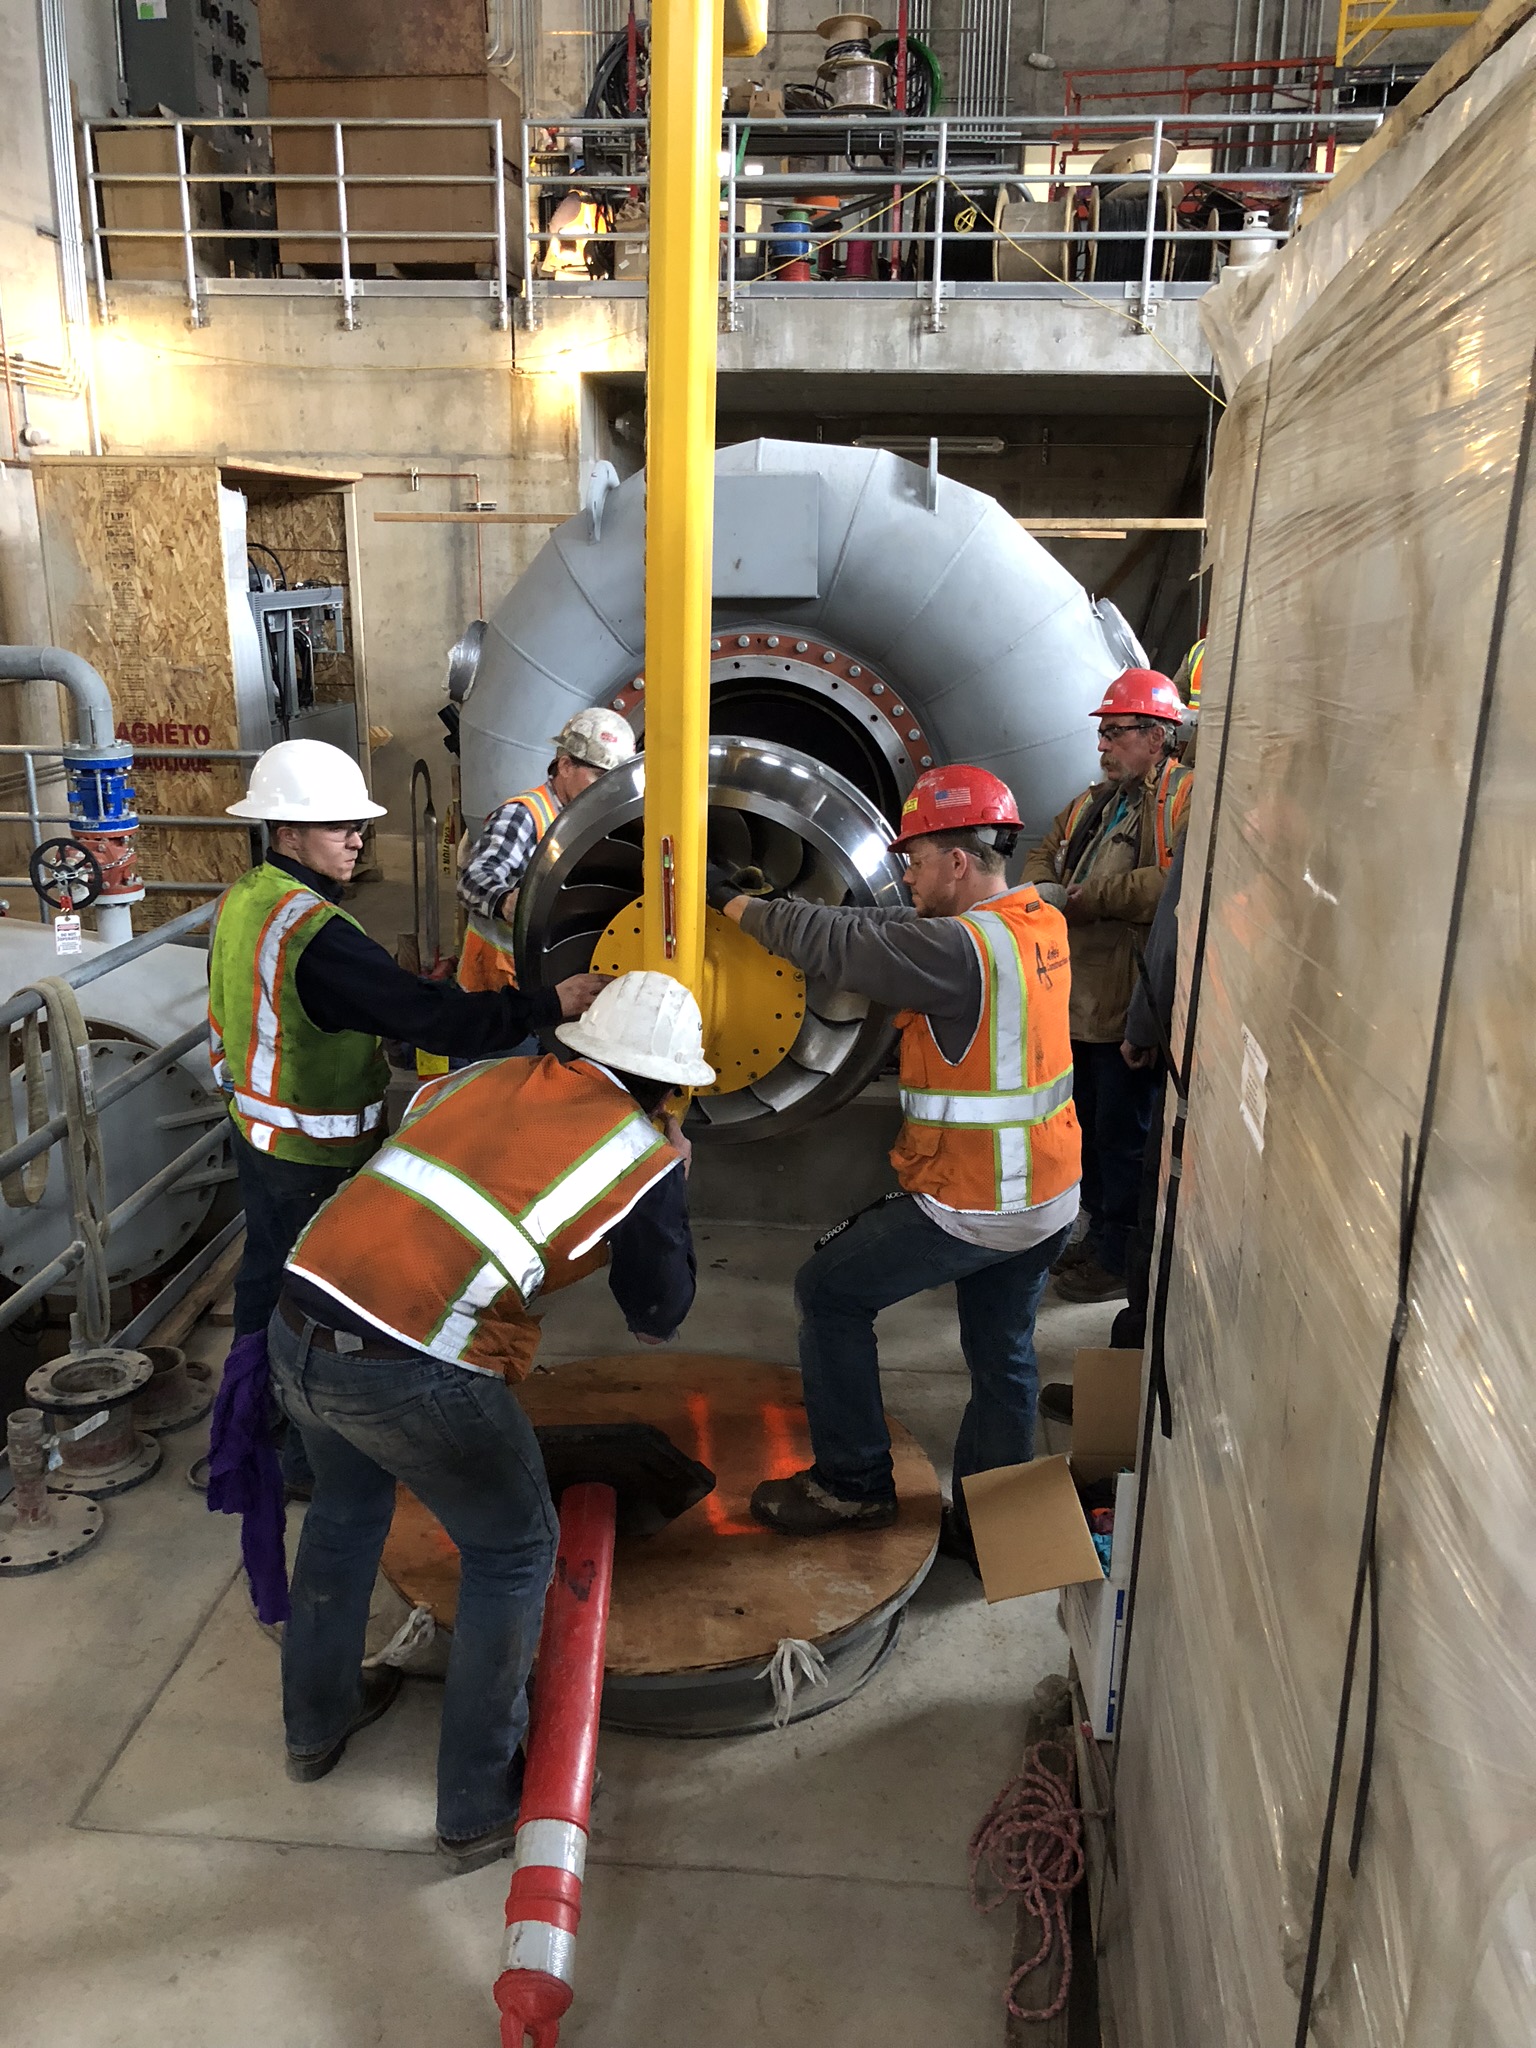 Employees and construction workers placing the turbine in the new powerhouse